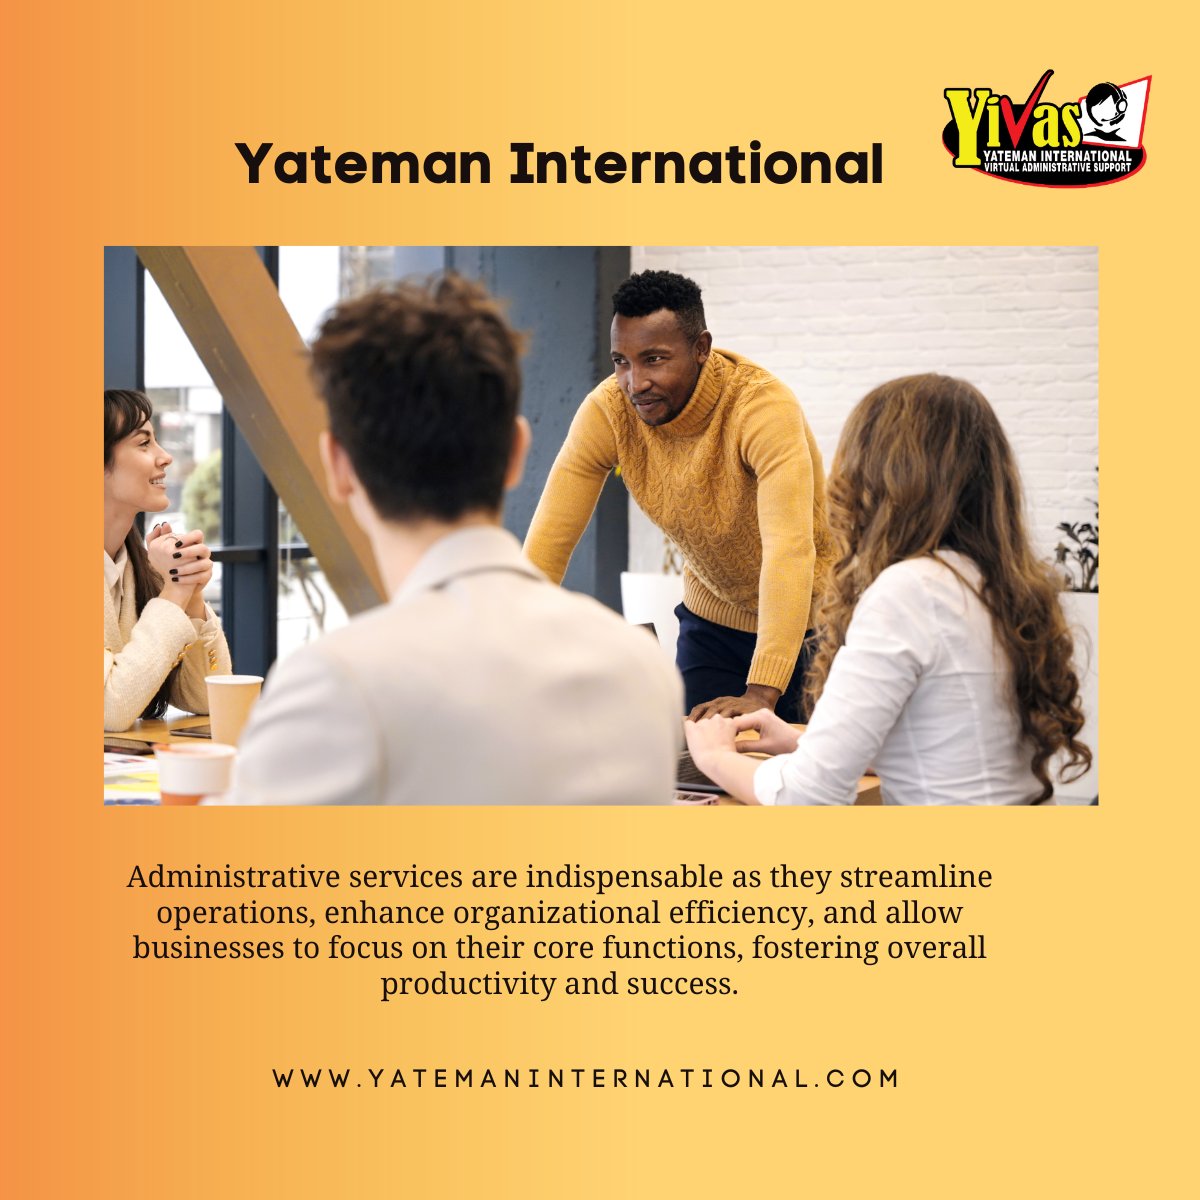 Effortless organization at your fingertips! Discover our top-notch administrative services. #AdminHeroes #OrganizeYourLife #VATalent #VirtualAssistant #RemoteSupport #BusinessSolutions #Outsourcing #EfficiencyBoost #YatemanInternational #BusinessOperations #TaskAutomation